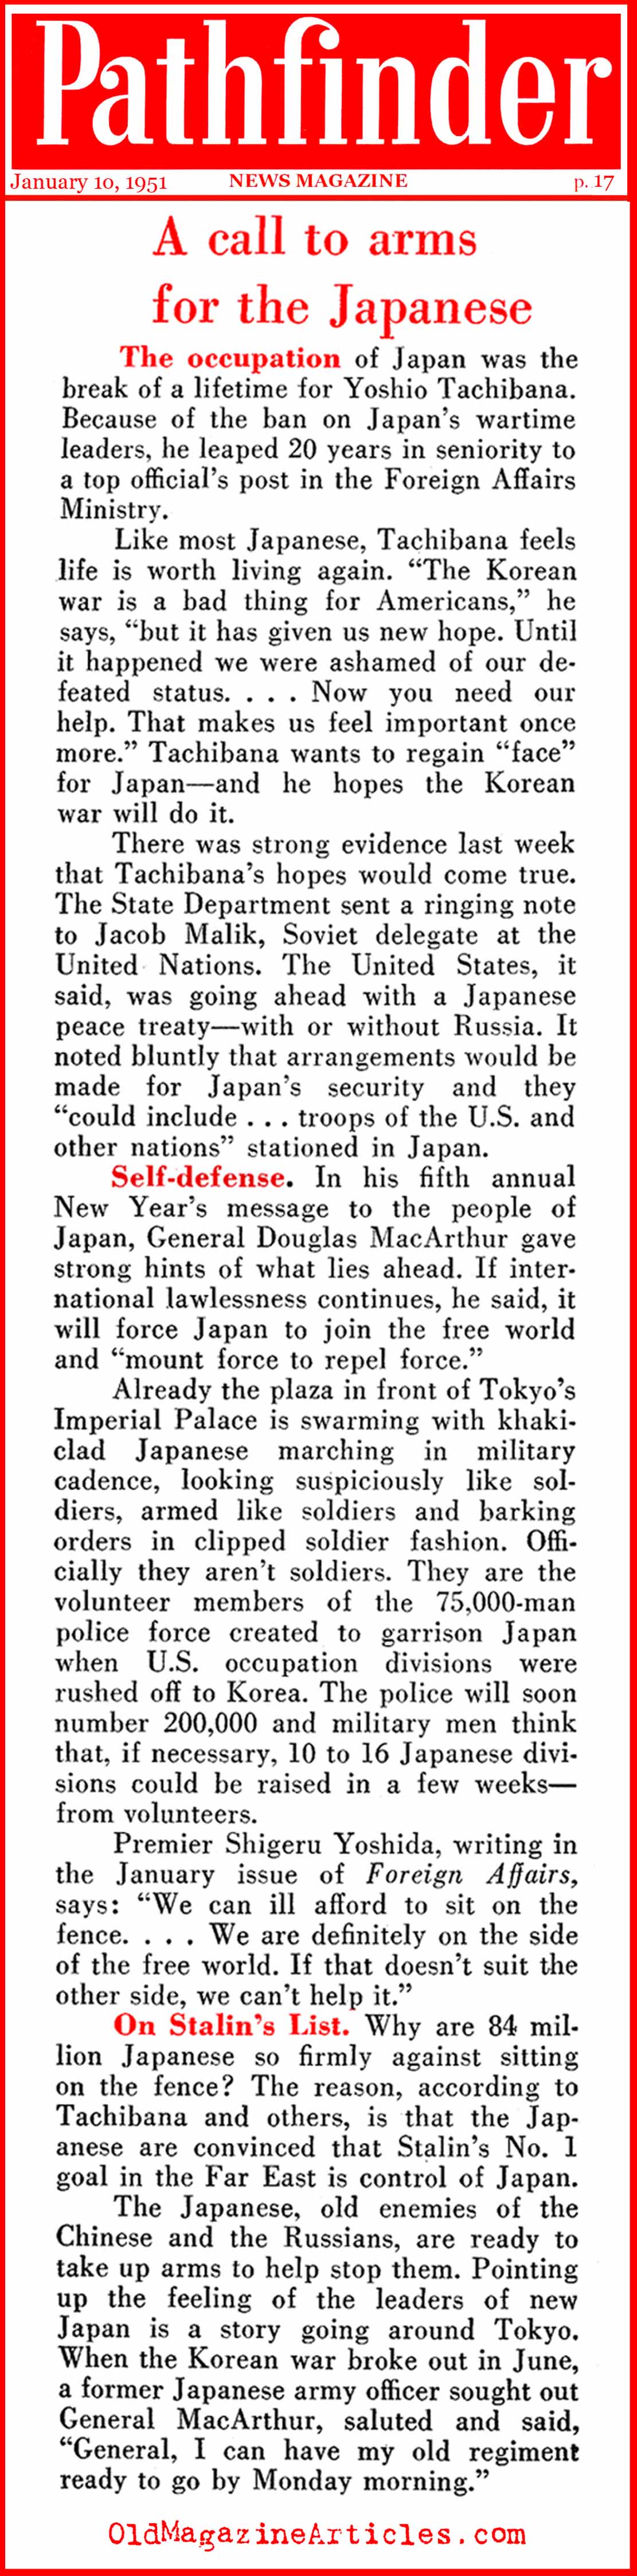 Japan Chipped-In (Pathfinder Magazine, 1951)